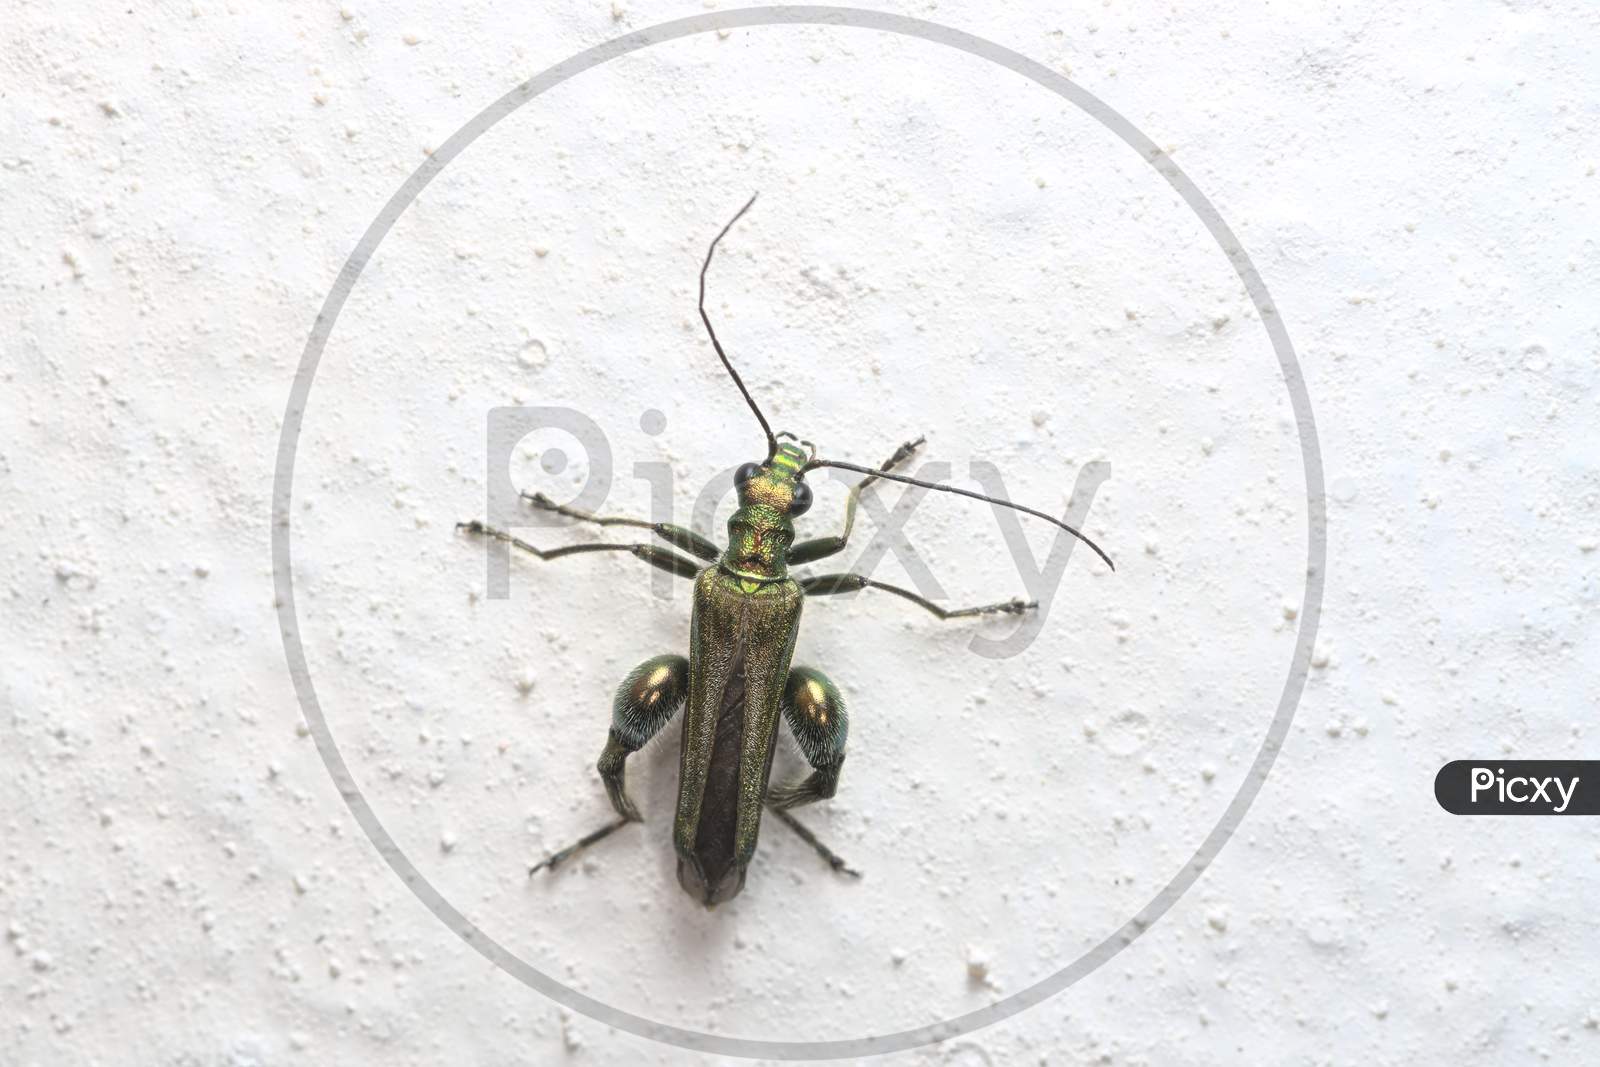 Male Oedemera Nobilis, Aka False Oil Beetle, Is Clearly Pictured Against The Lumpy White Paint Of A Wall.